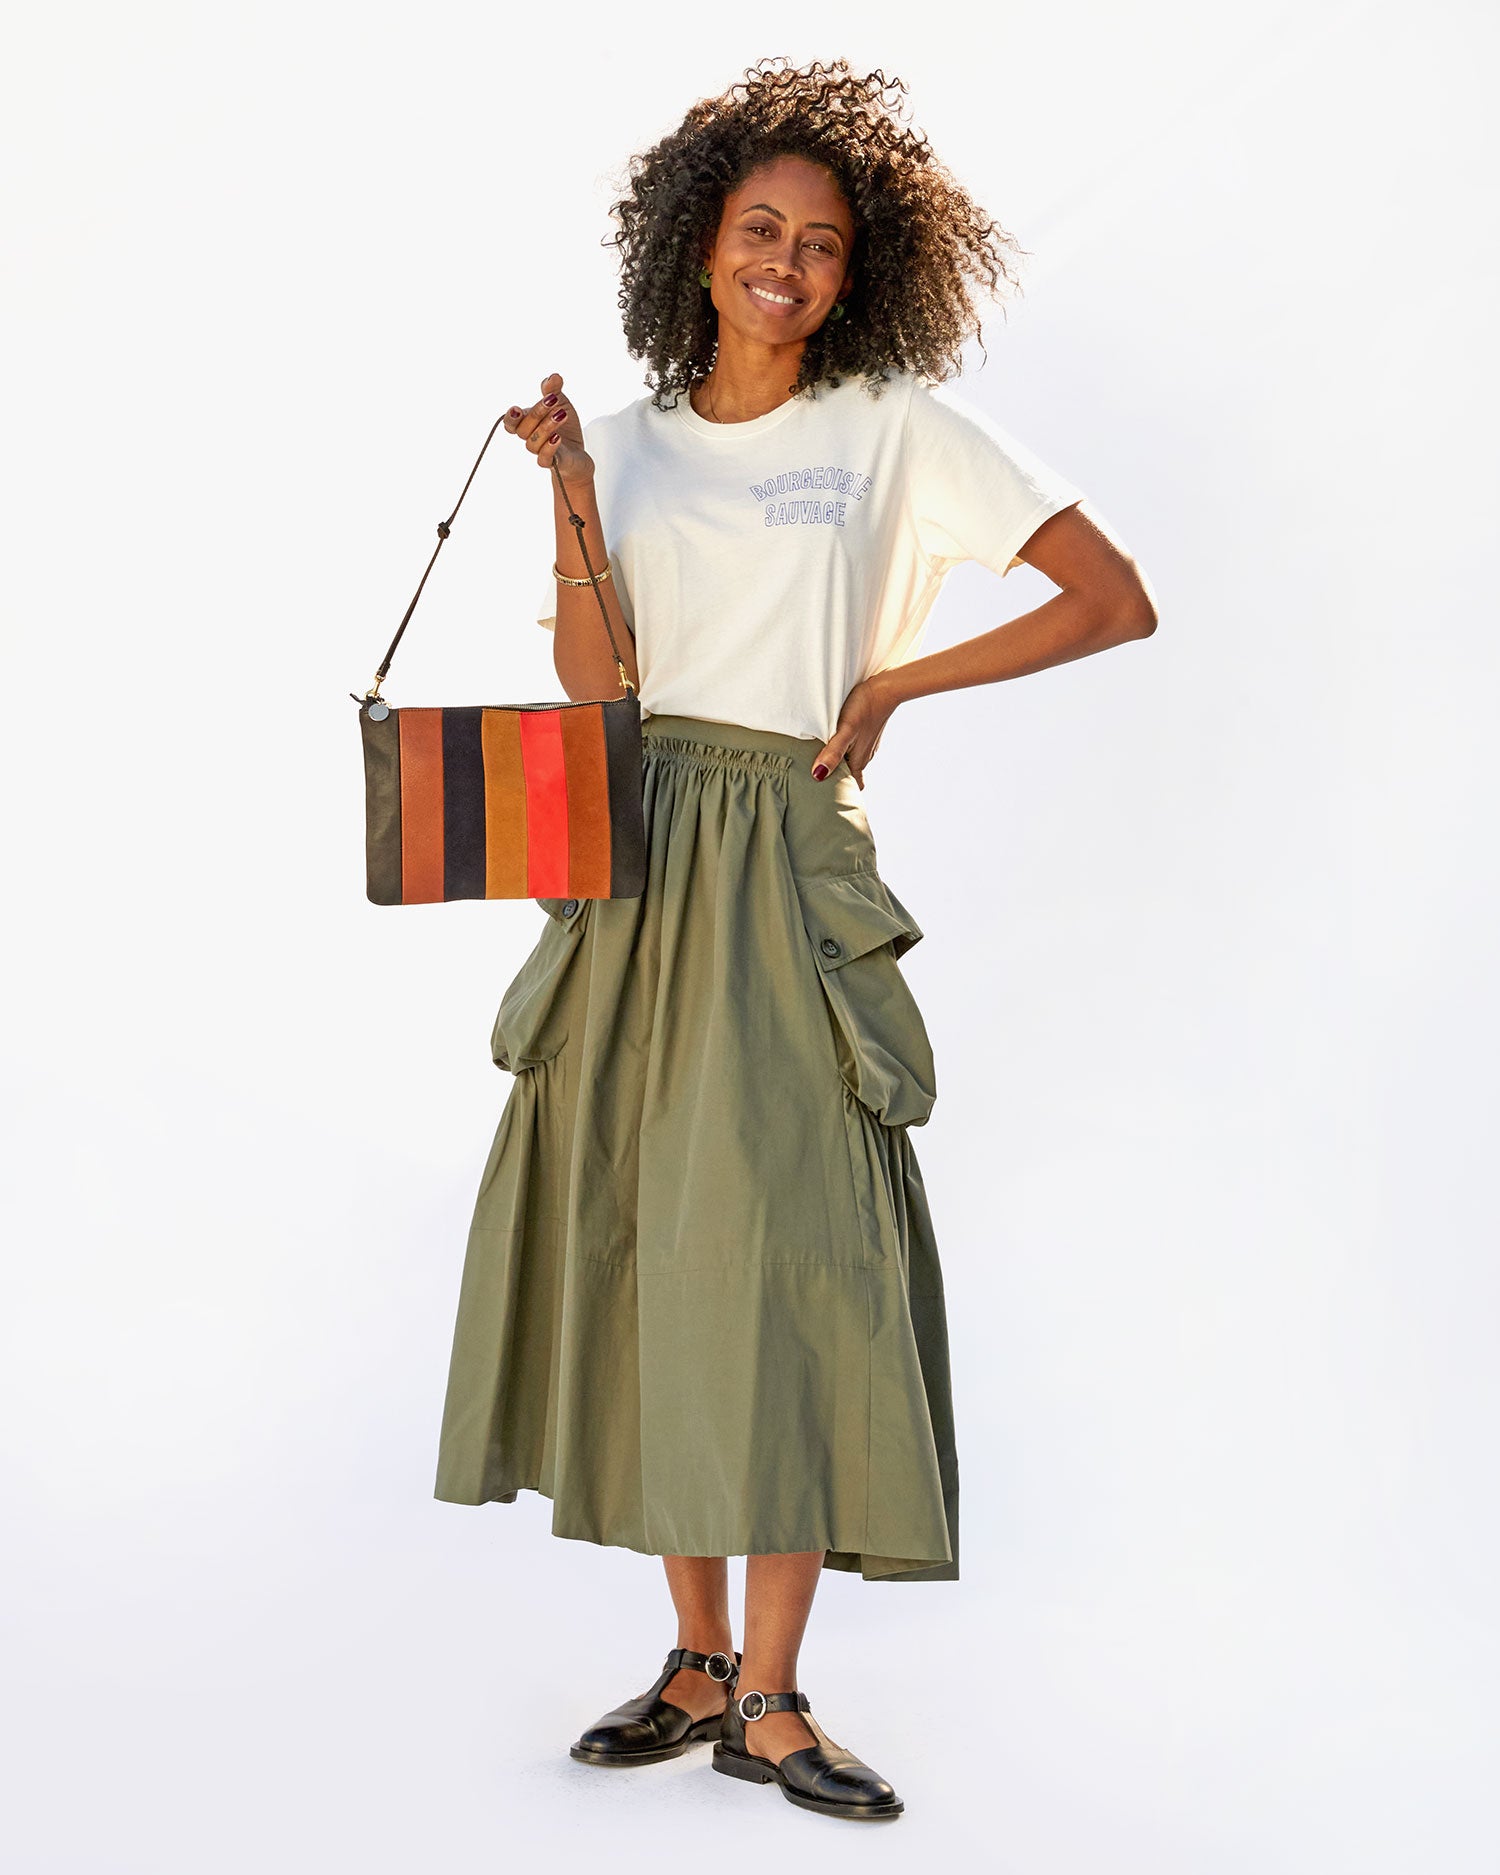 Mecca carrying the Suede / Nappa / Rustic Patchwork Flat Clutch with Tabs by the thin knotted shoulder strap